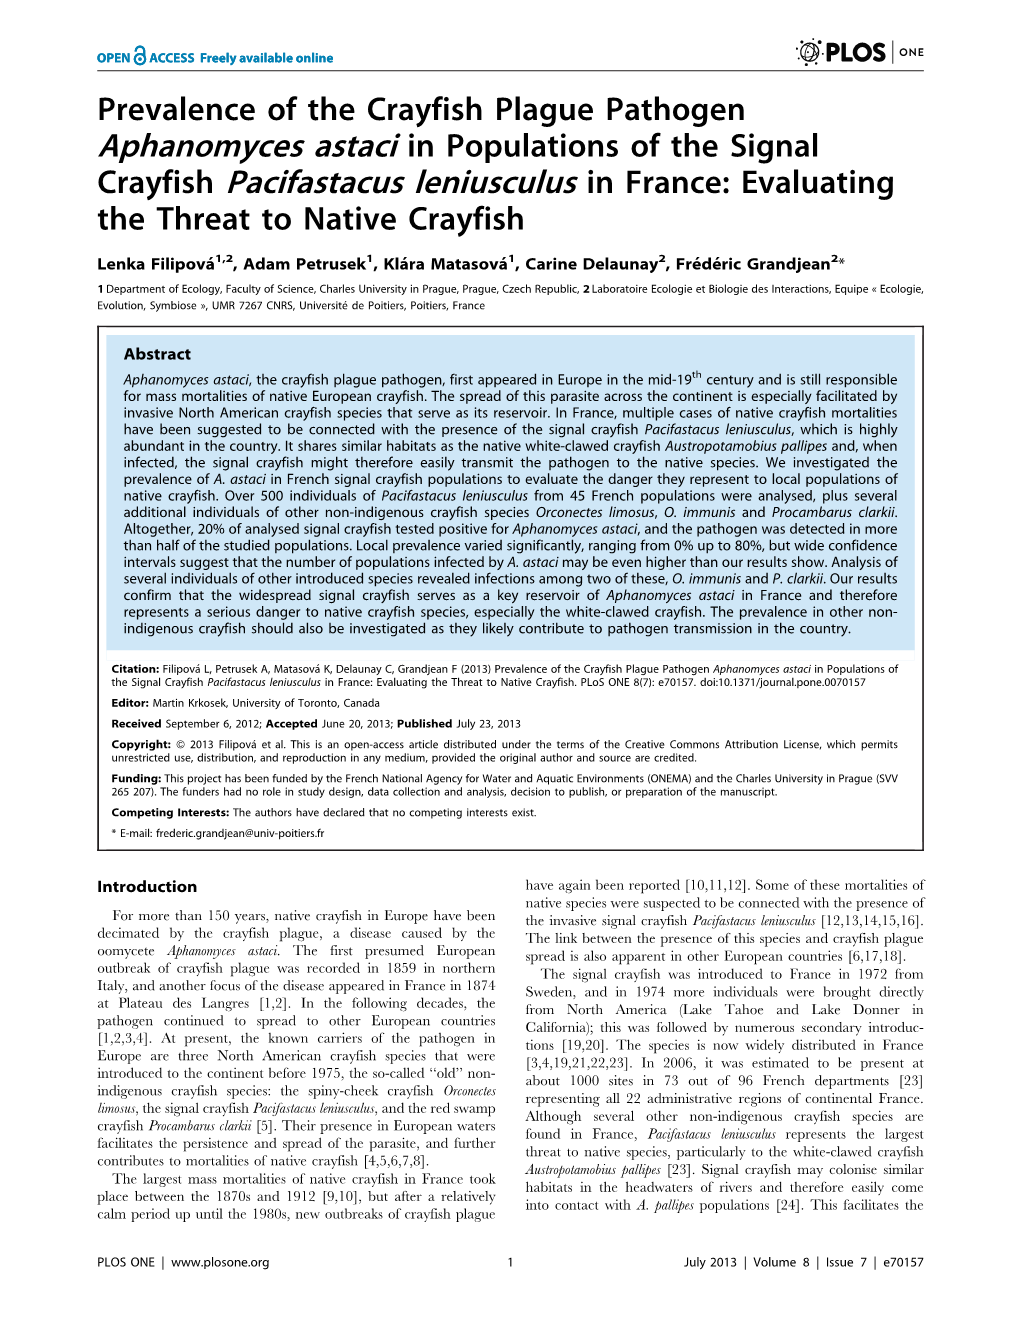 Crayfish Pacifastacus Leniusculus in France: Evaluating the Threat to Native Crayfish